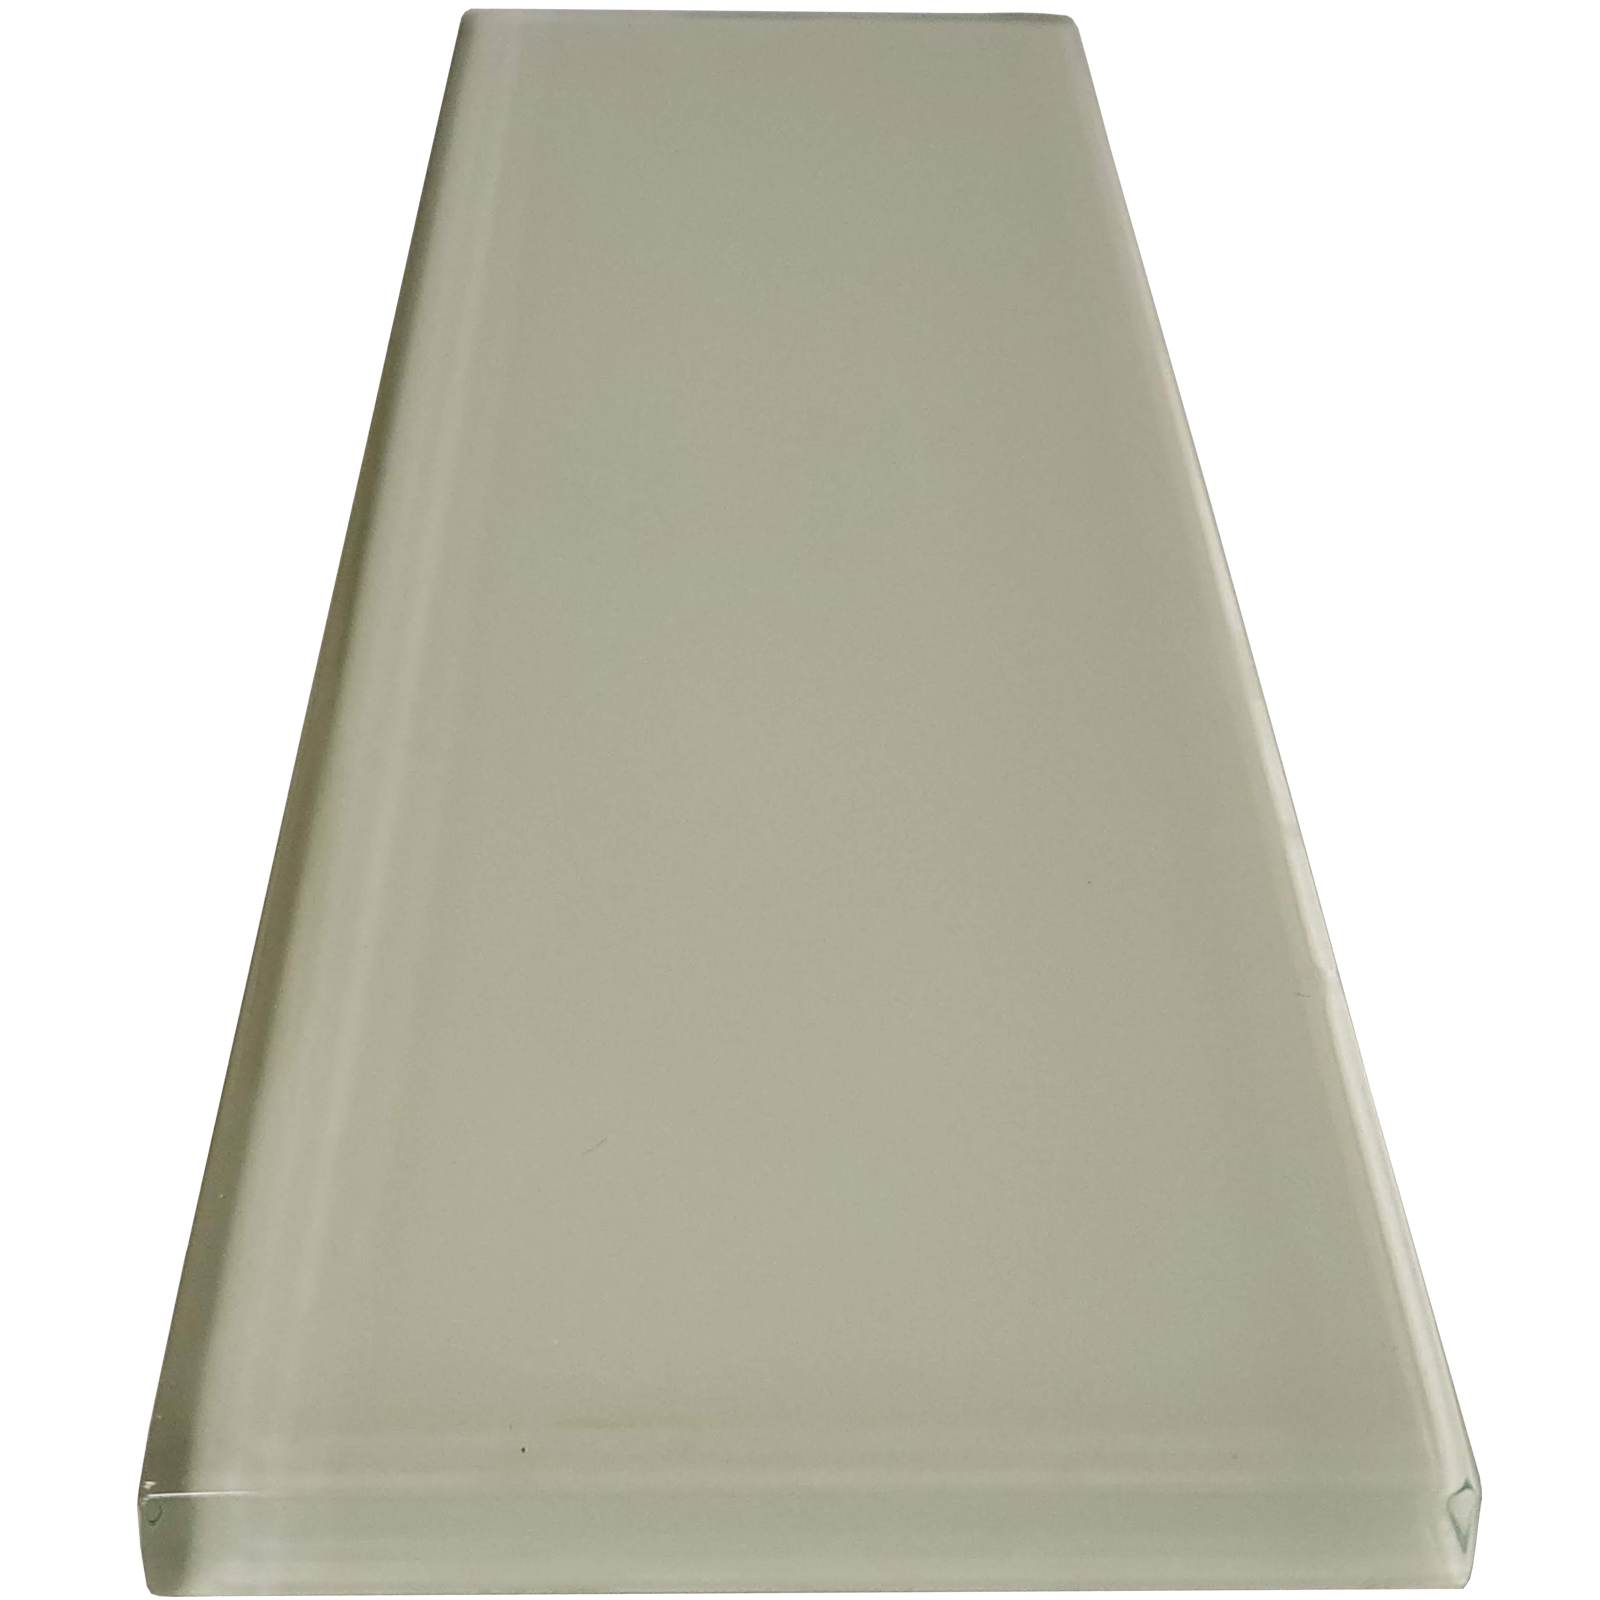 3x12 Oyster Cream Glass Tile 